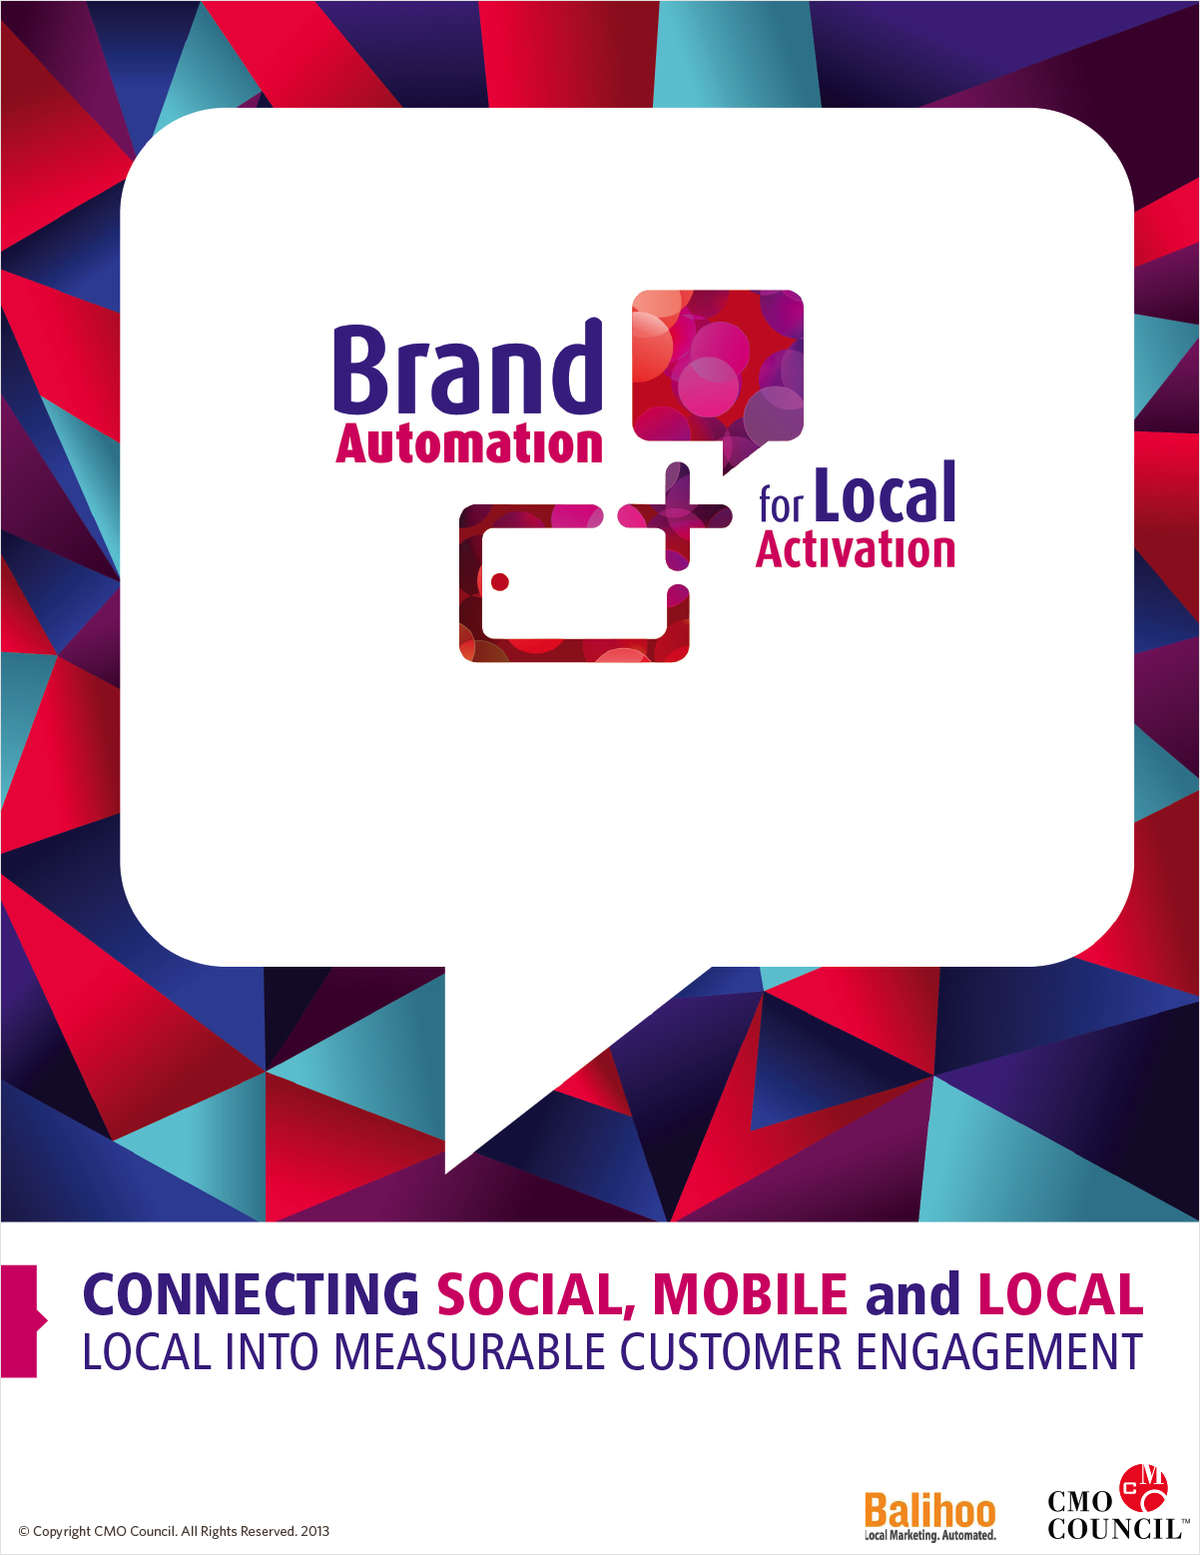 Brand Automation for Local Activation: Connecting Customer Engagement Into Measurable Local Strategies